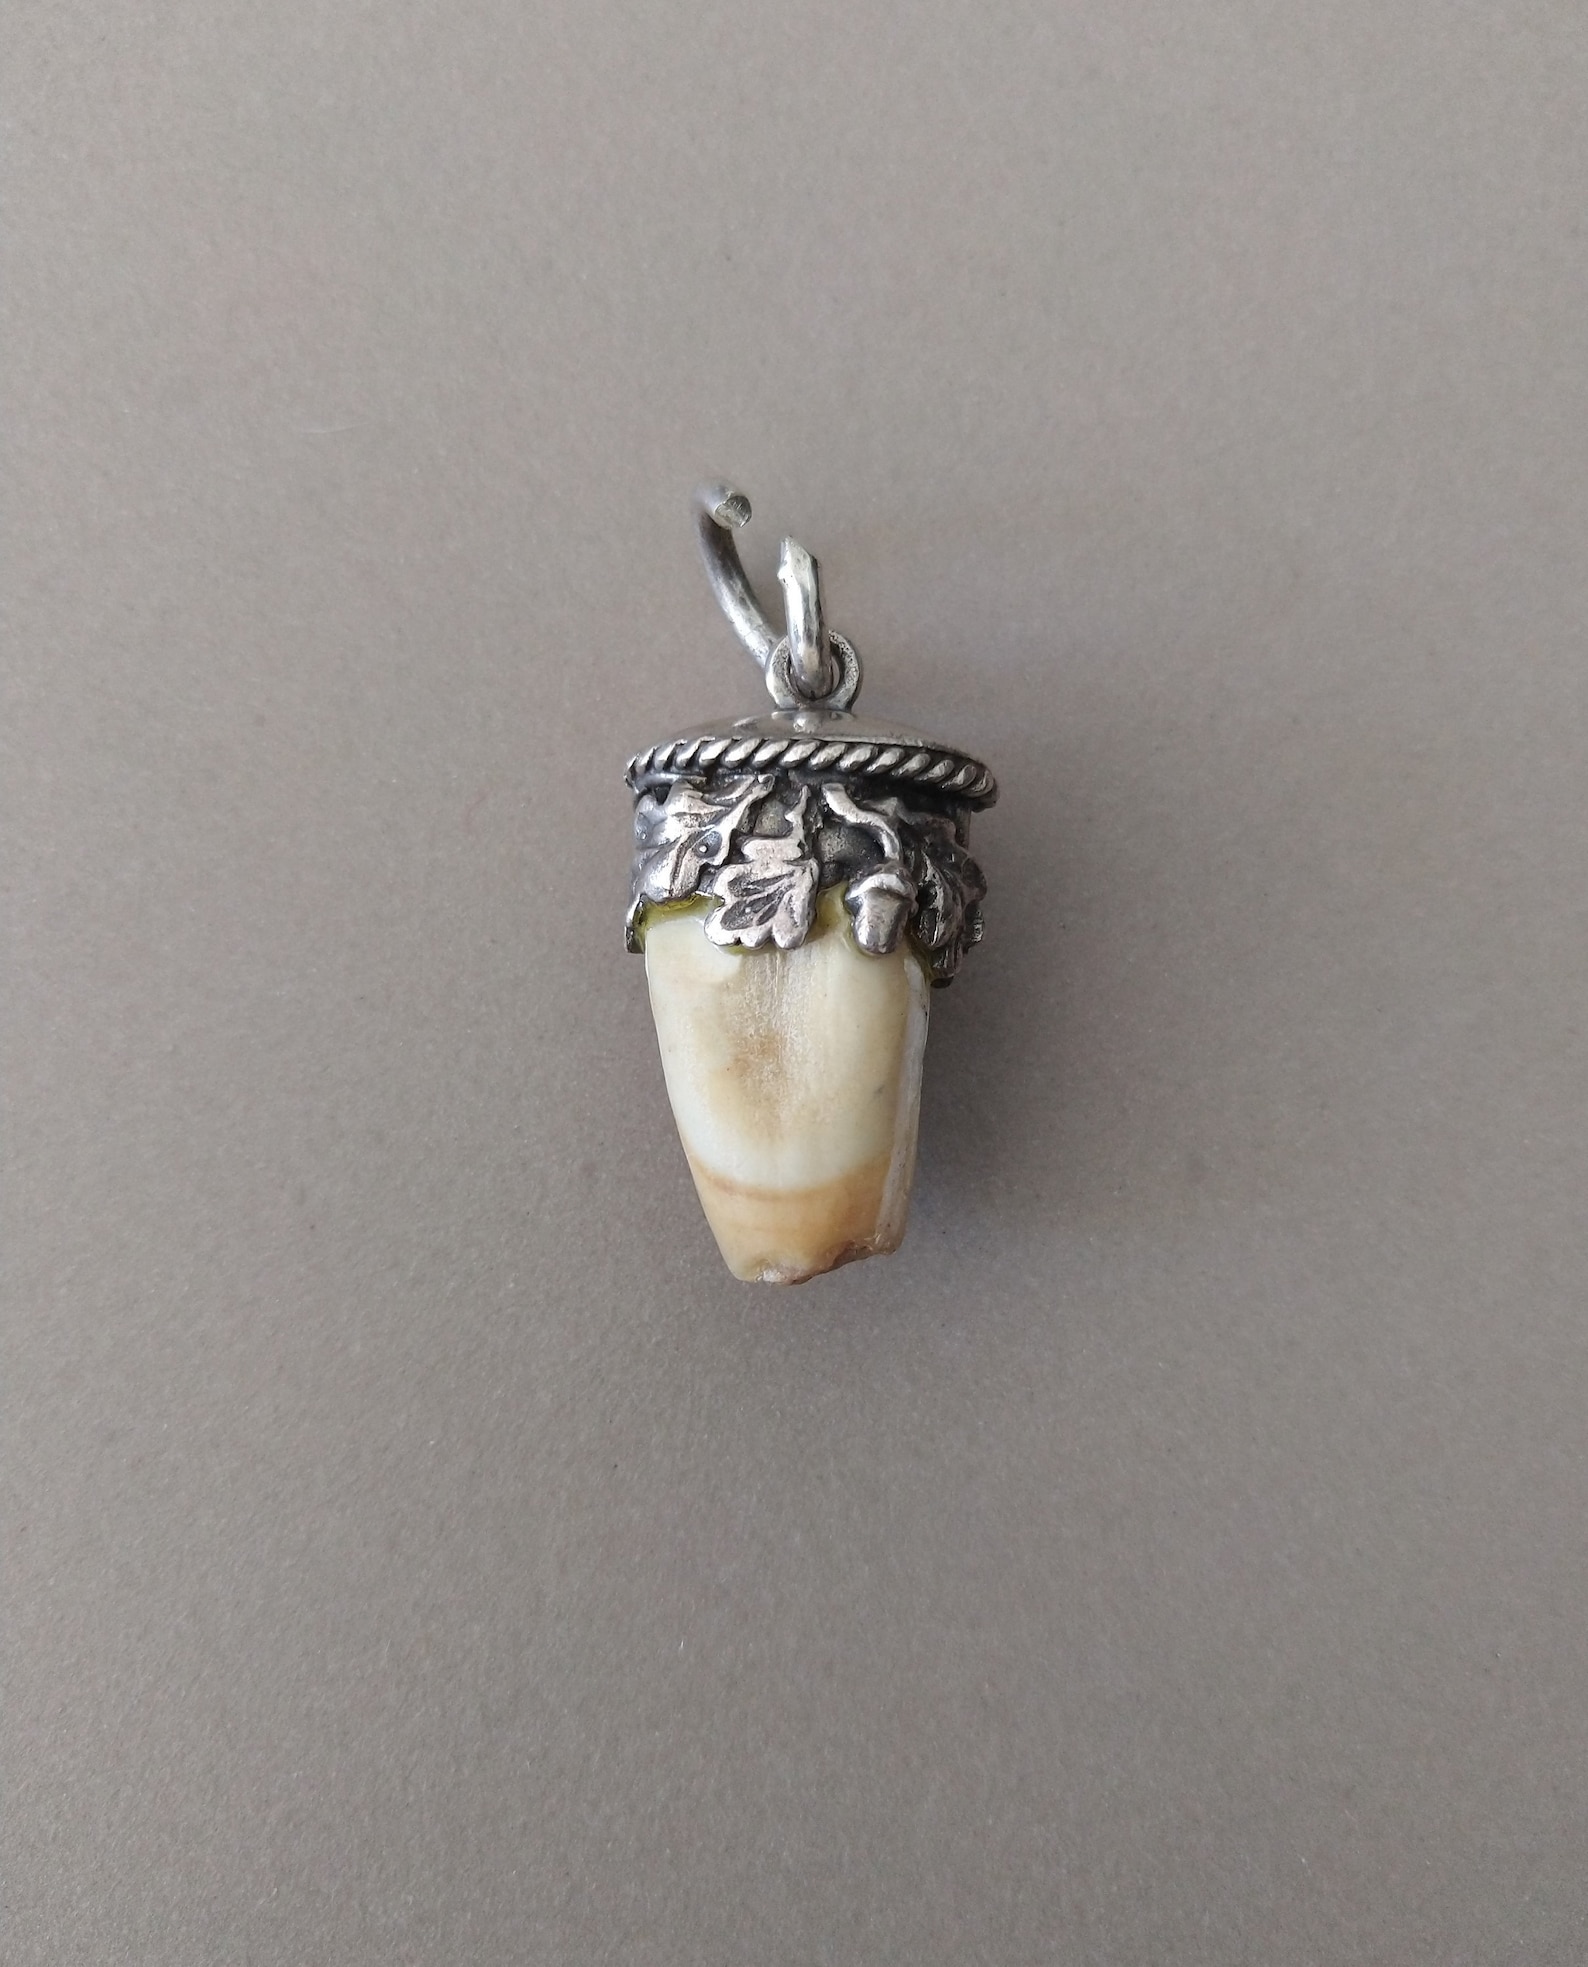 Antique Genuine Tooth Hunting Trophy Solid Silver Fob Charm